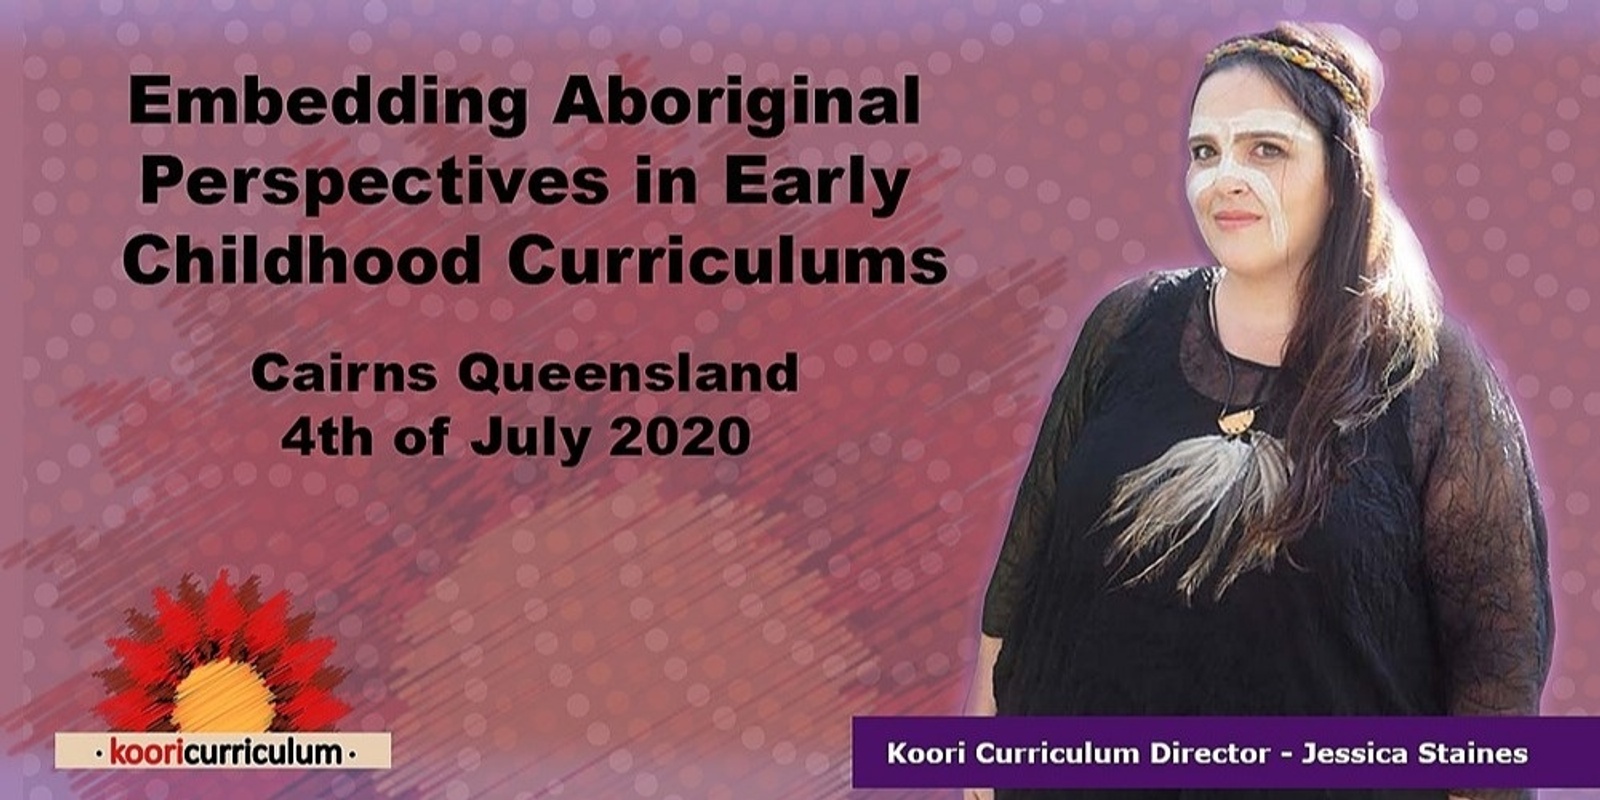 Banner image for Cairns - Embedding Aboriginal Perspectives in Early Childhood Curriculums